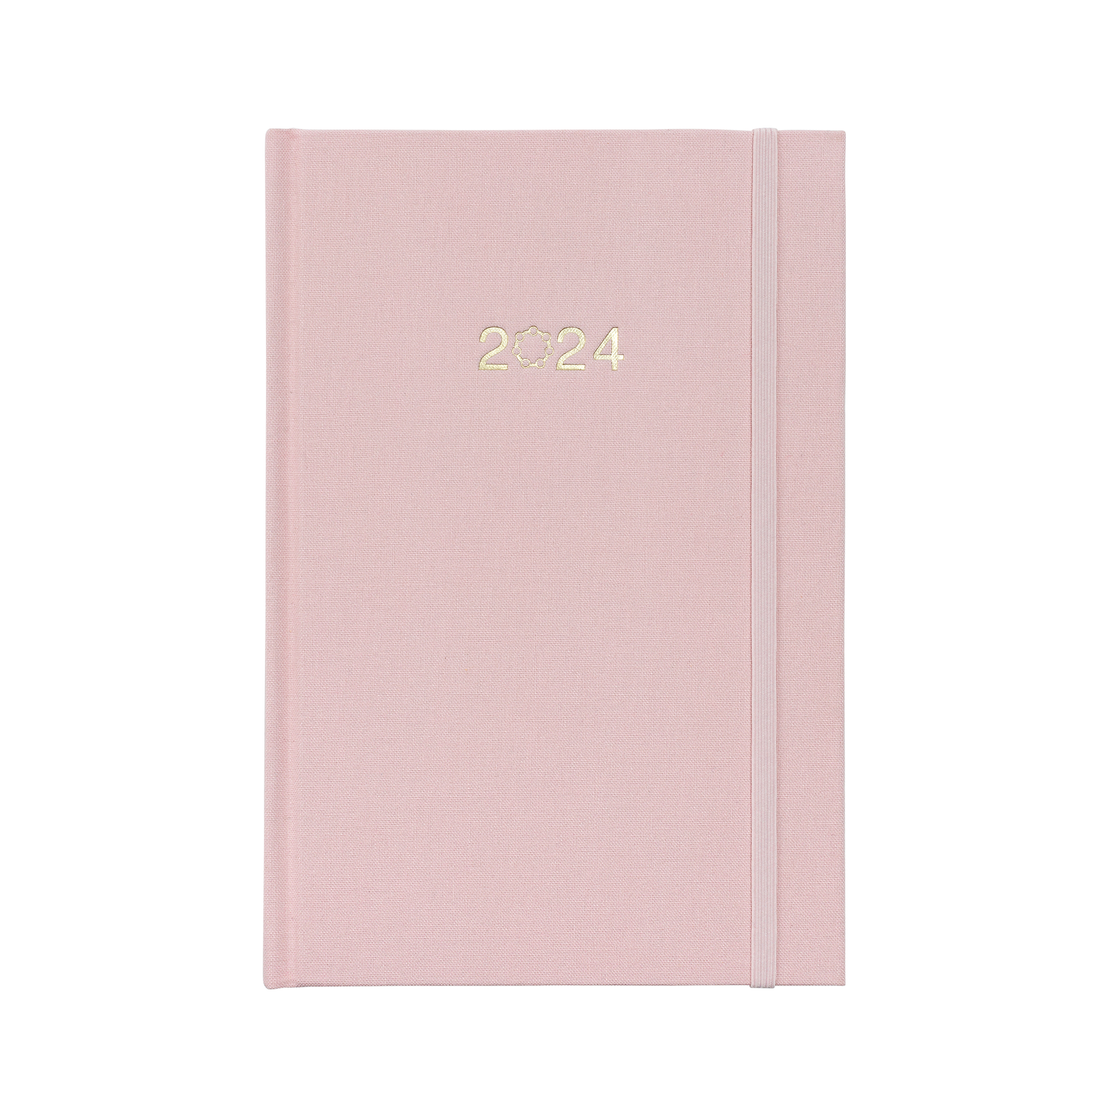  A beautiful pink linen planner with 2024 on the cover and a matching pink elastic closure